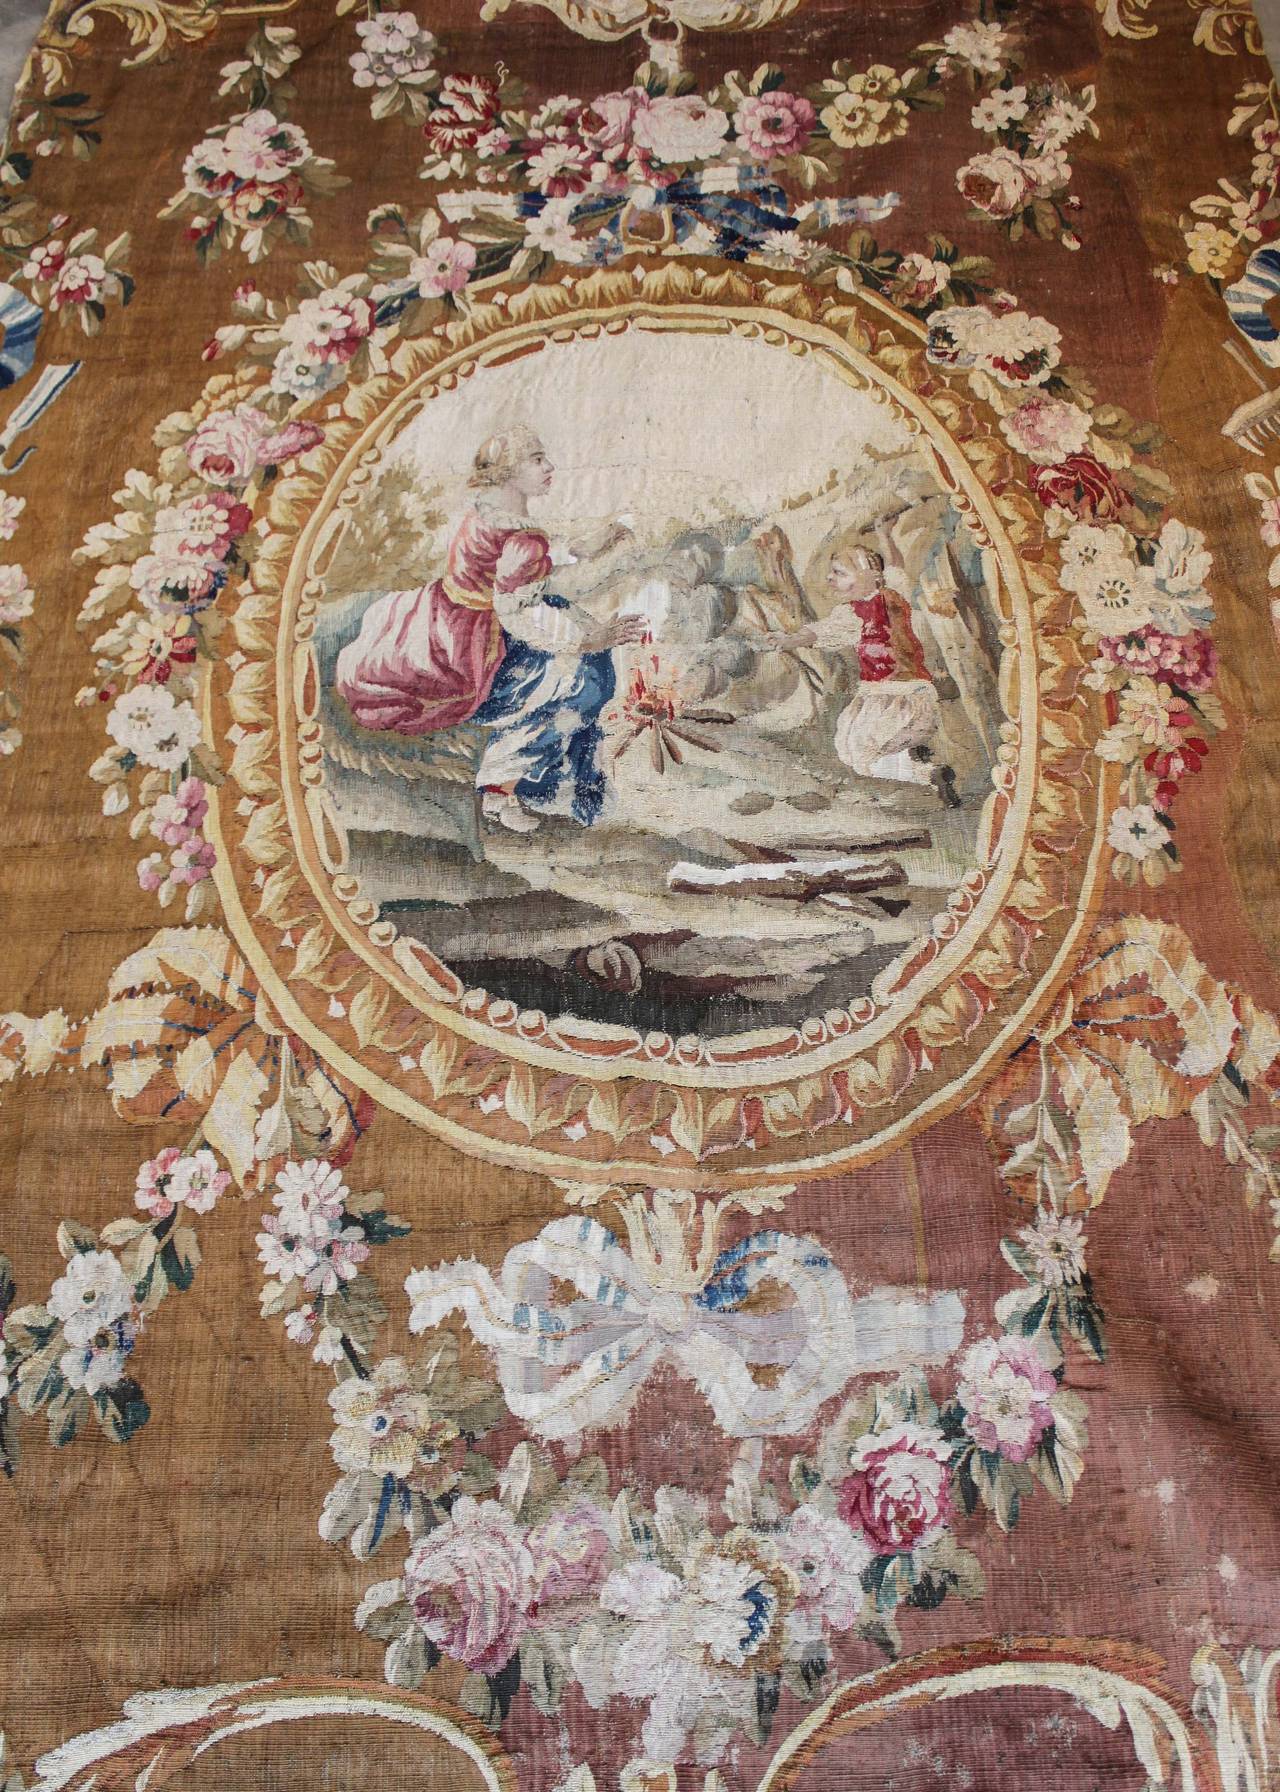 Original 18th century Aubusson tapestry. Figures depict a scene around a fire in the outdoors, encircled by stylized foliage and floral motifs. Inquire for condition.
Panache Antiques.